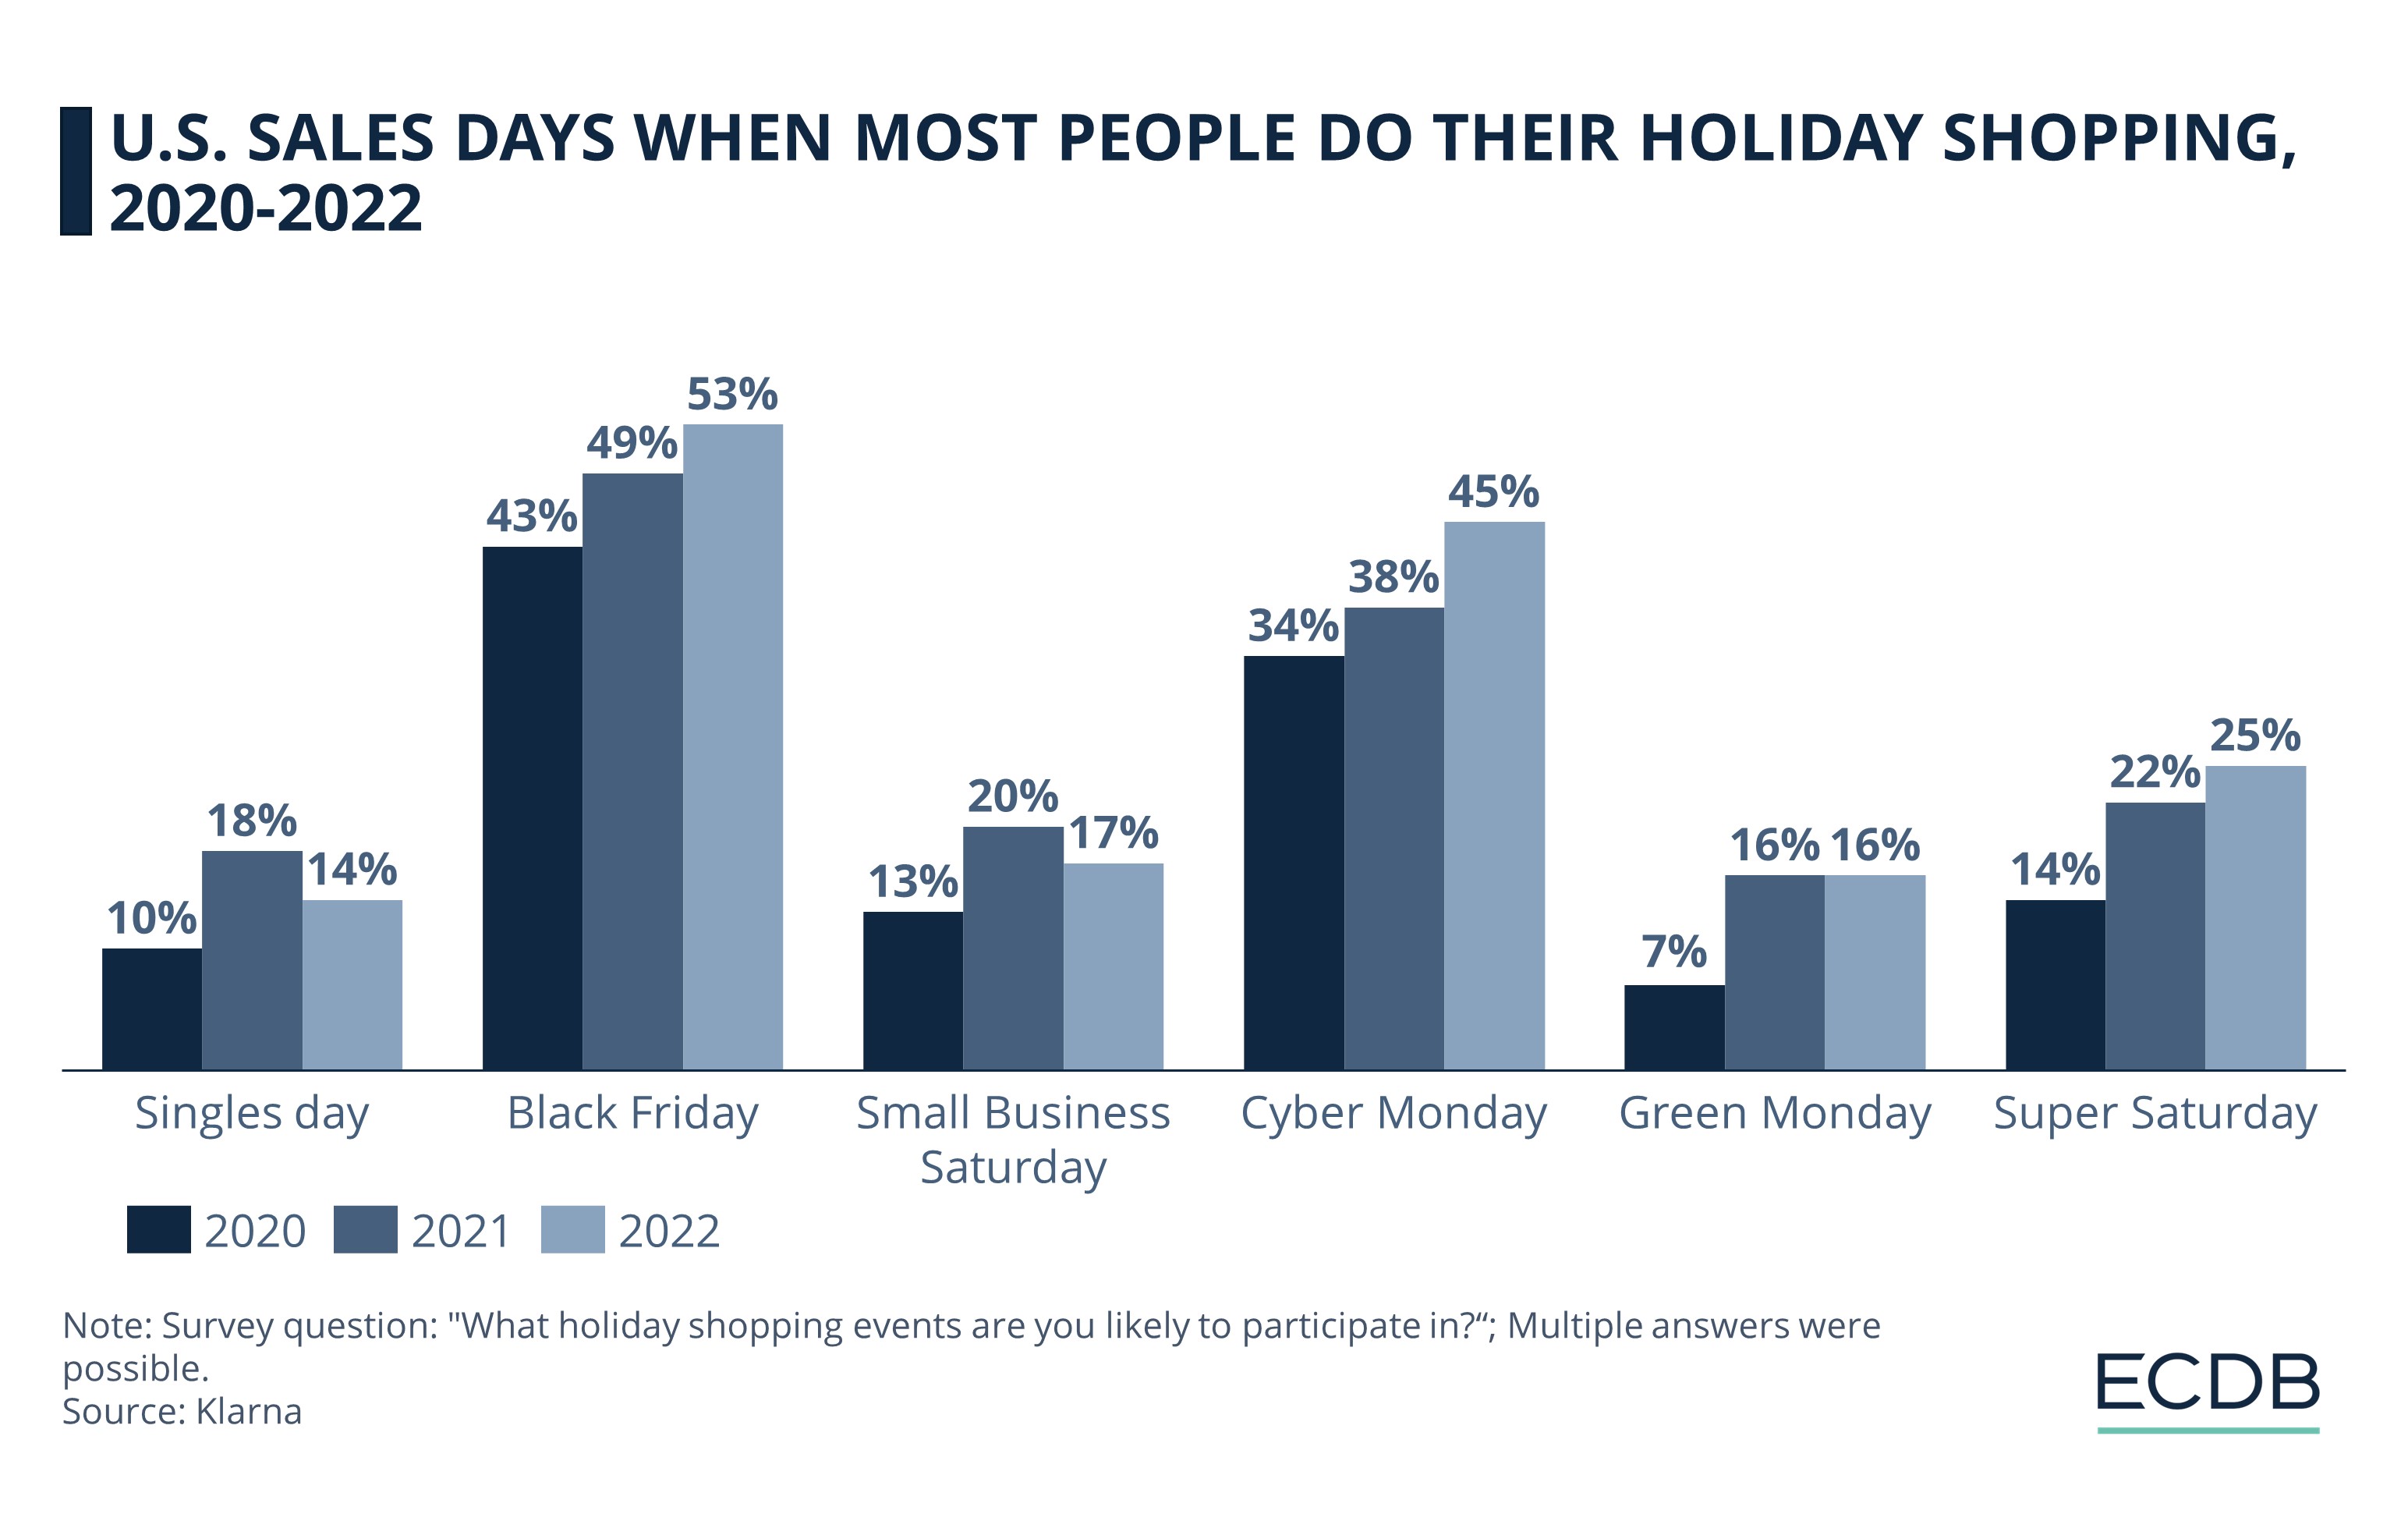 U.S. sales days when most people do their holiday shopping, 2020-2022